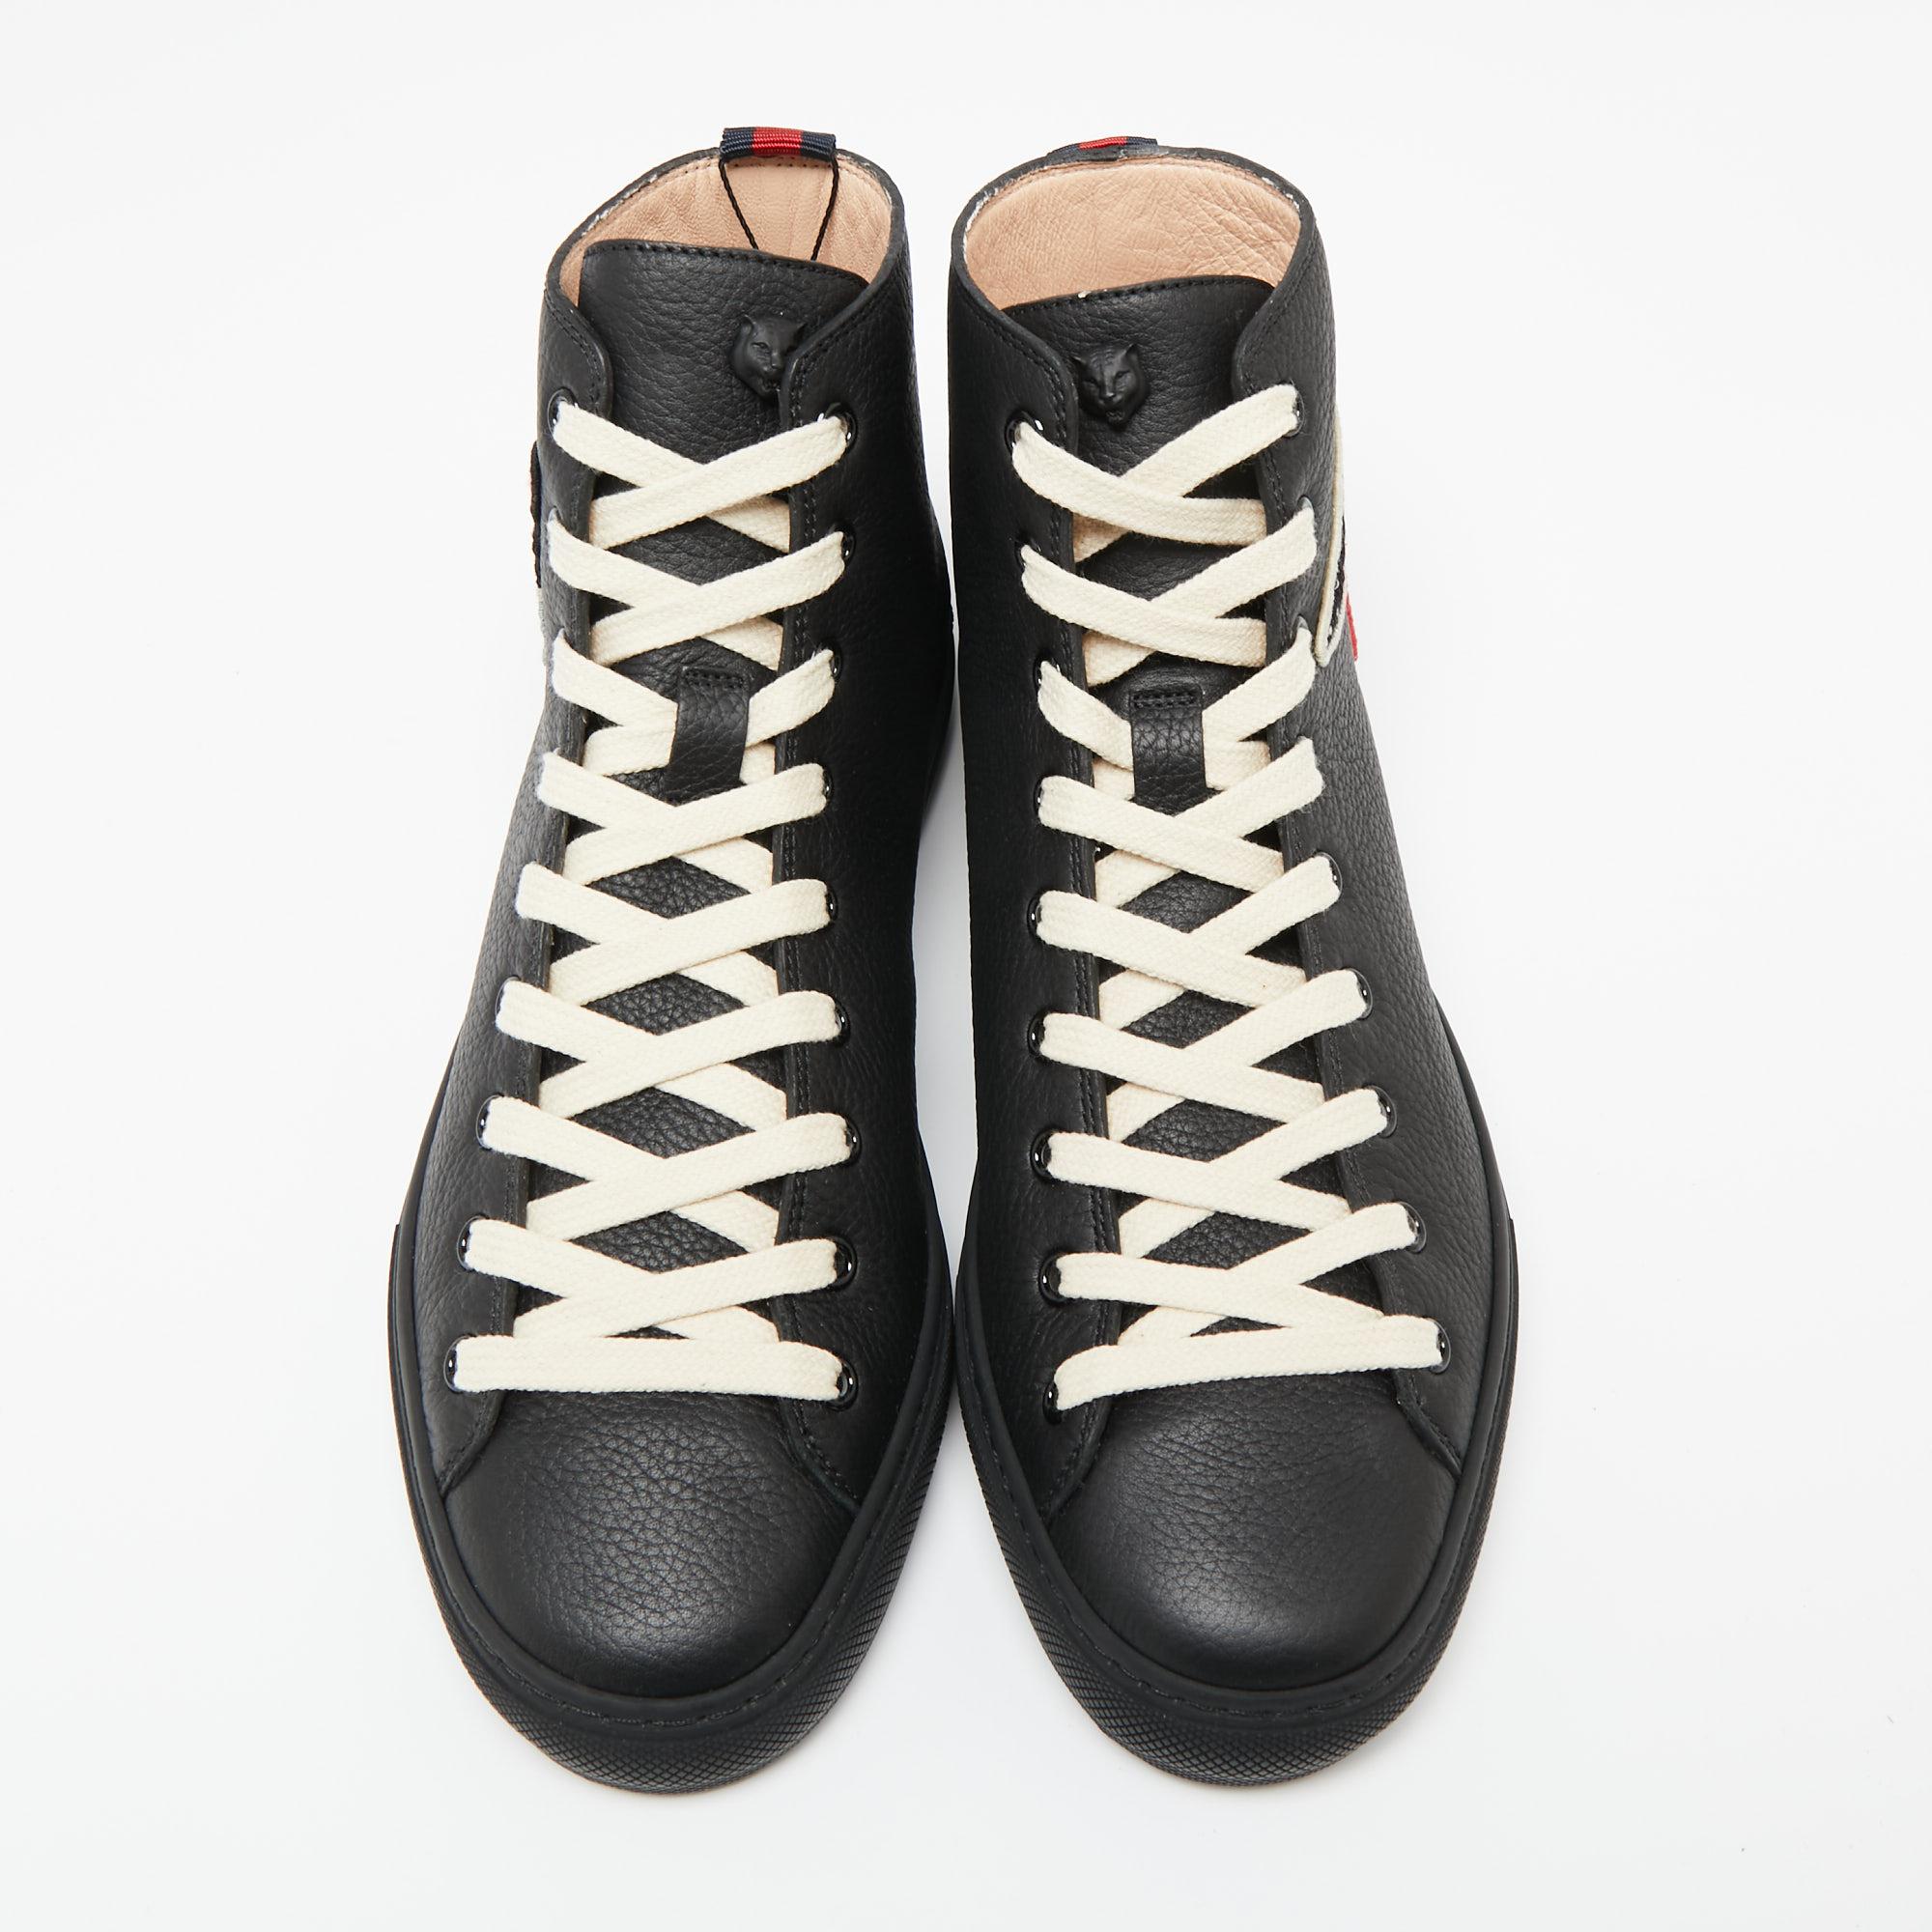 Black High Top Gucci Sneakers - 11 For Sale on 1stDibs